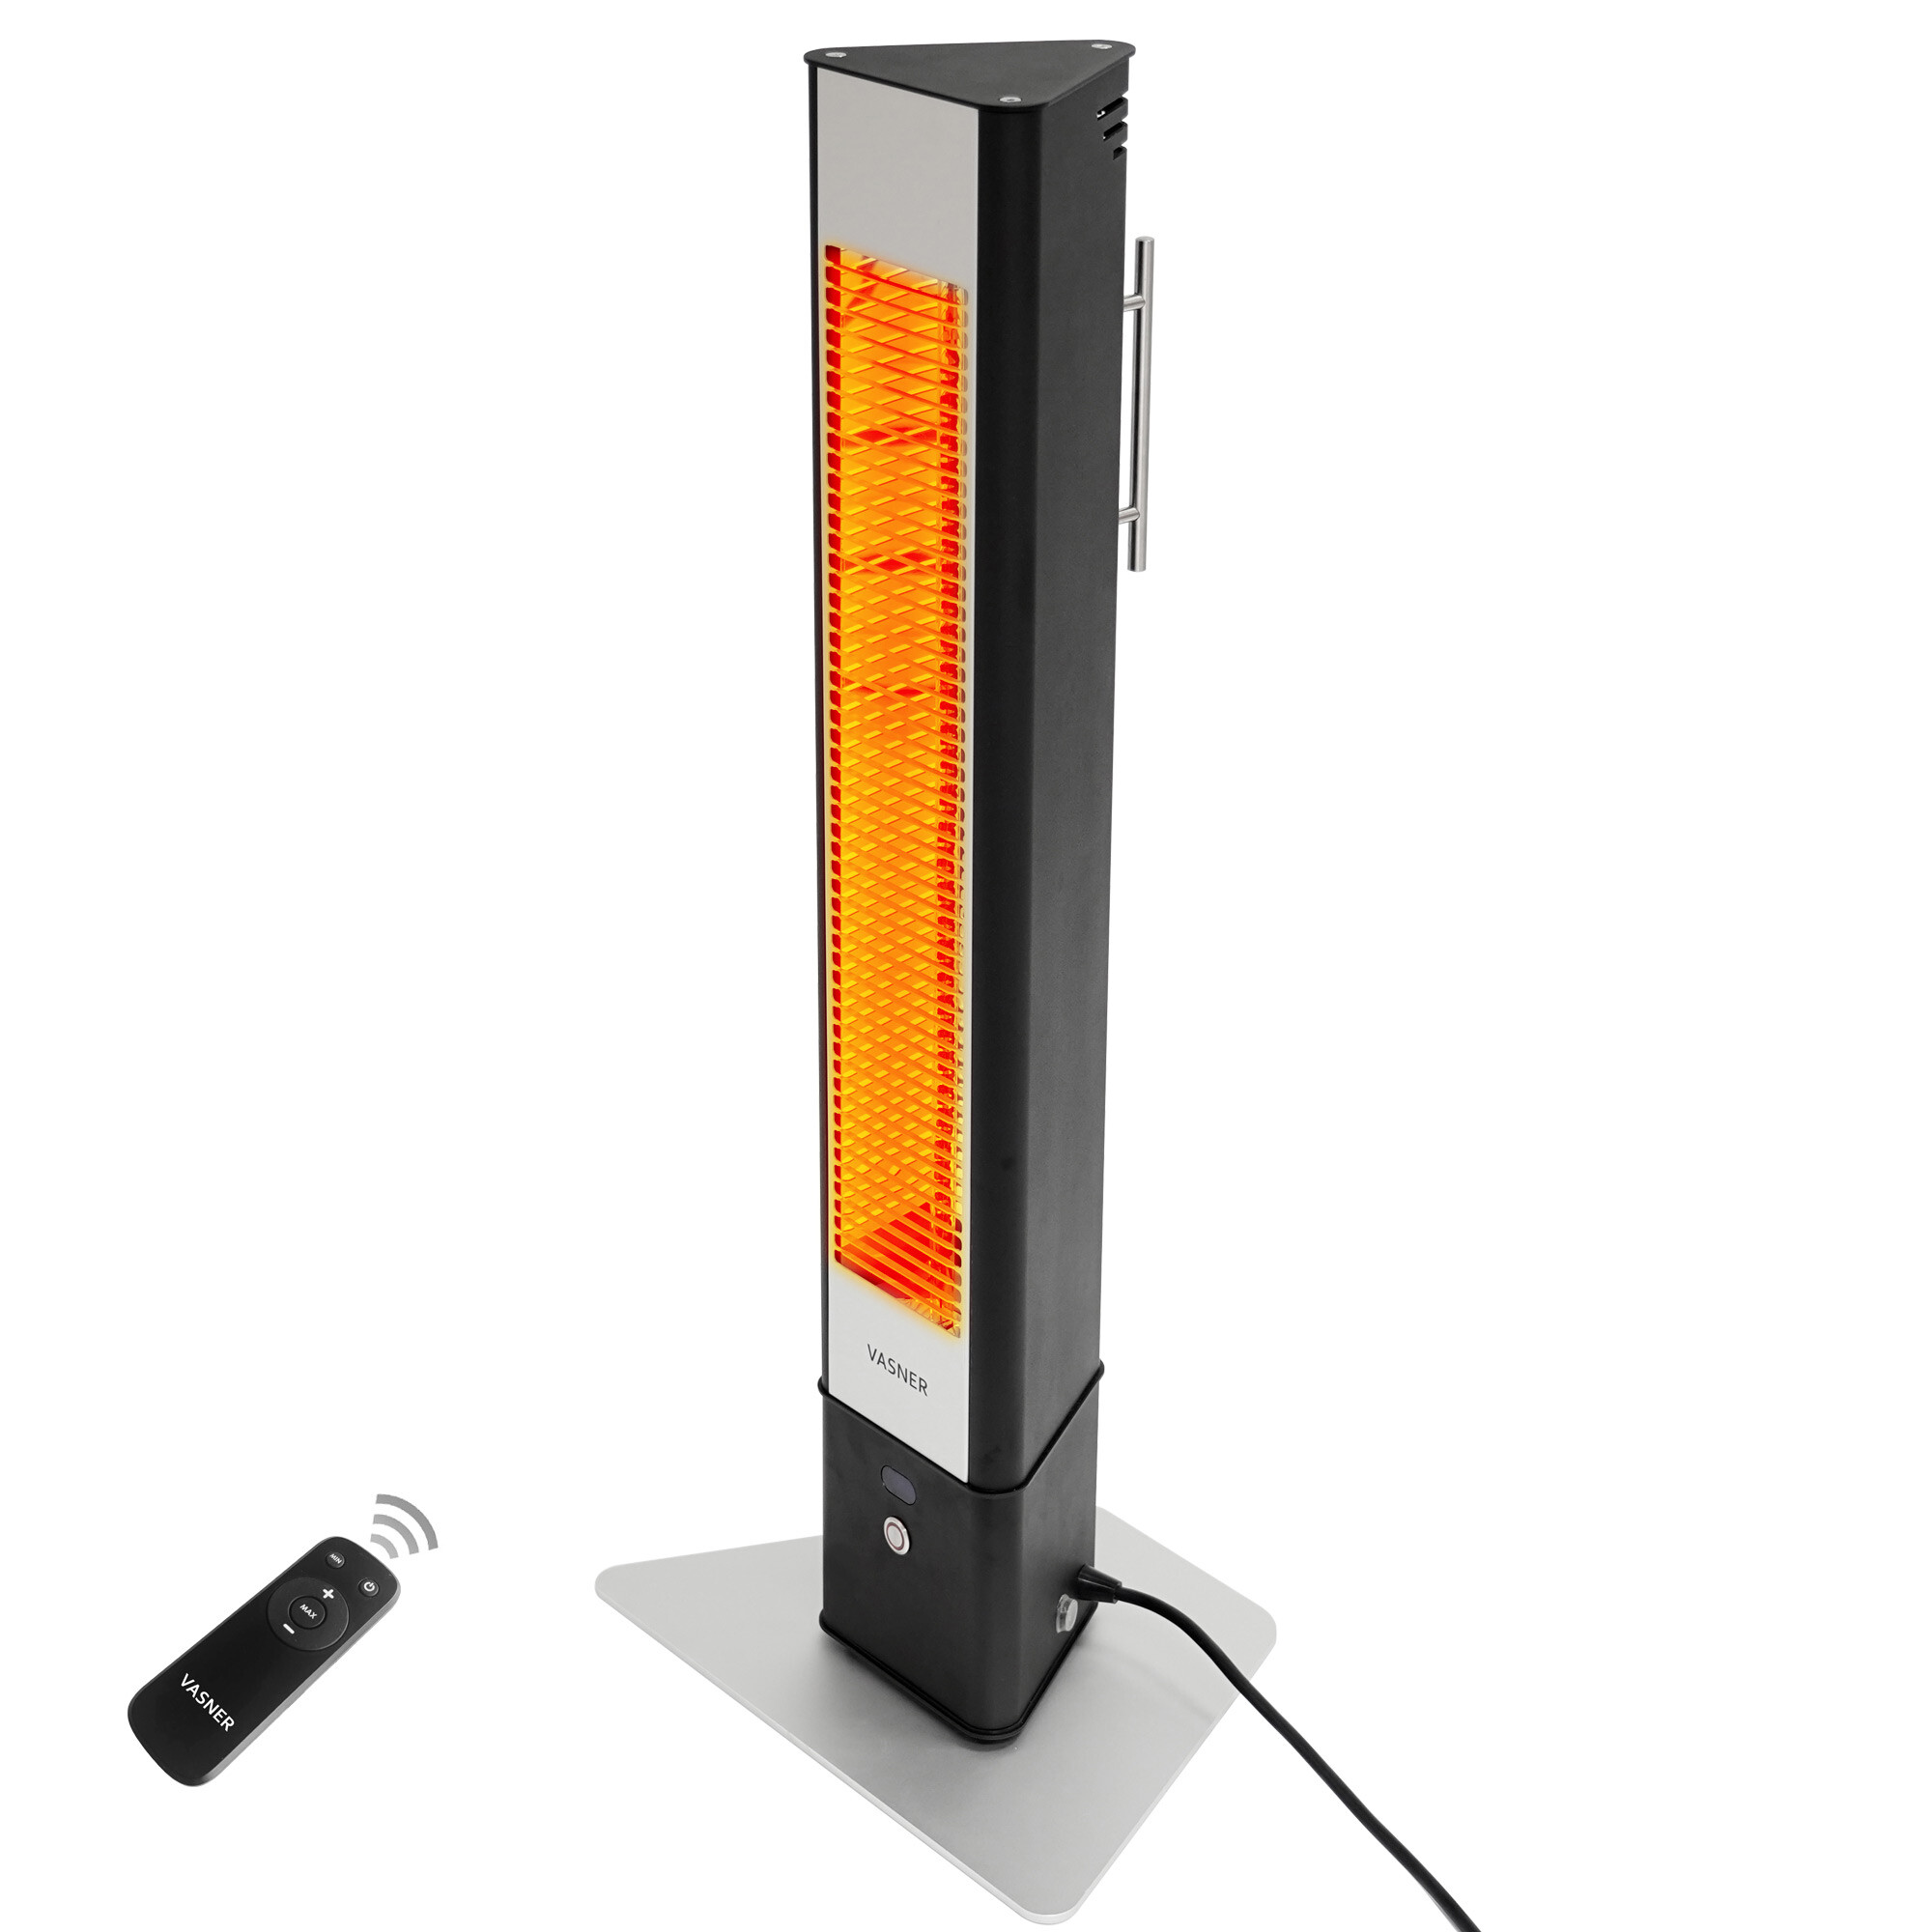 Best outdoor heater for open areas aswell as closed indoor spaces